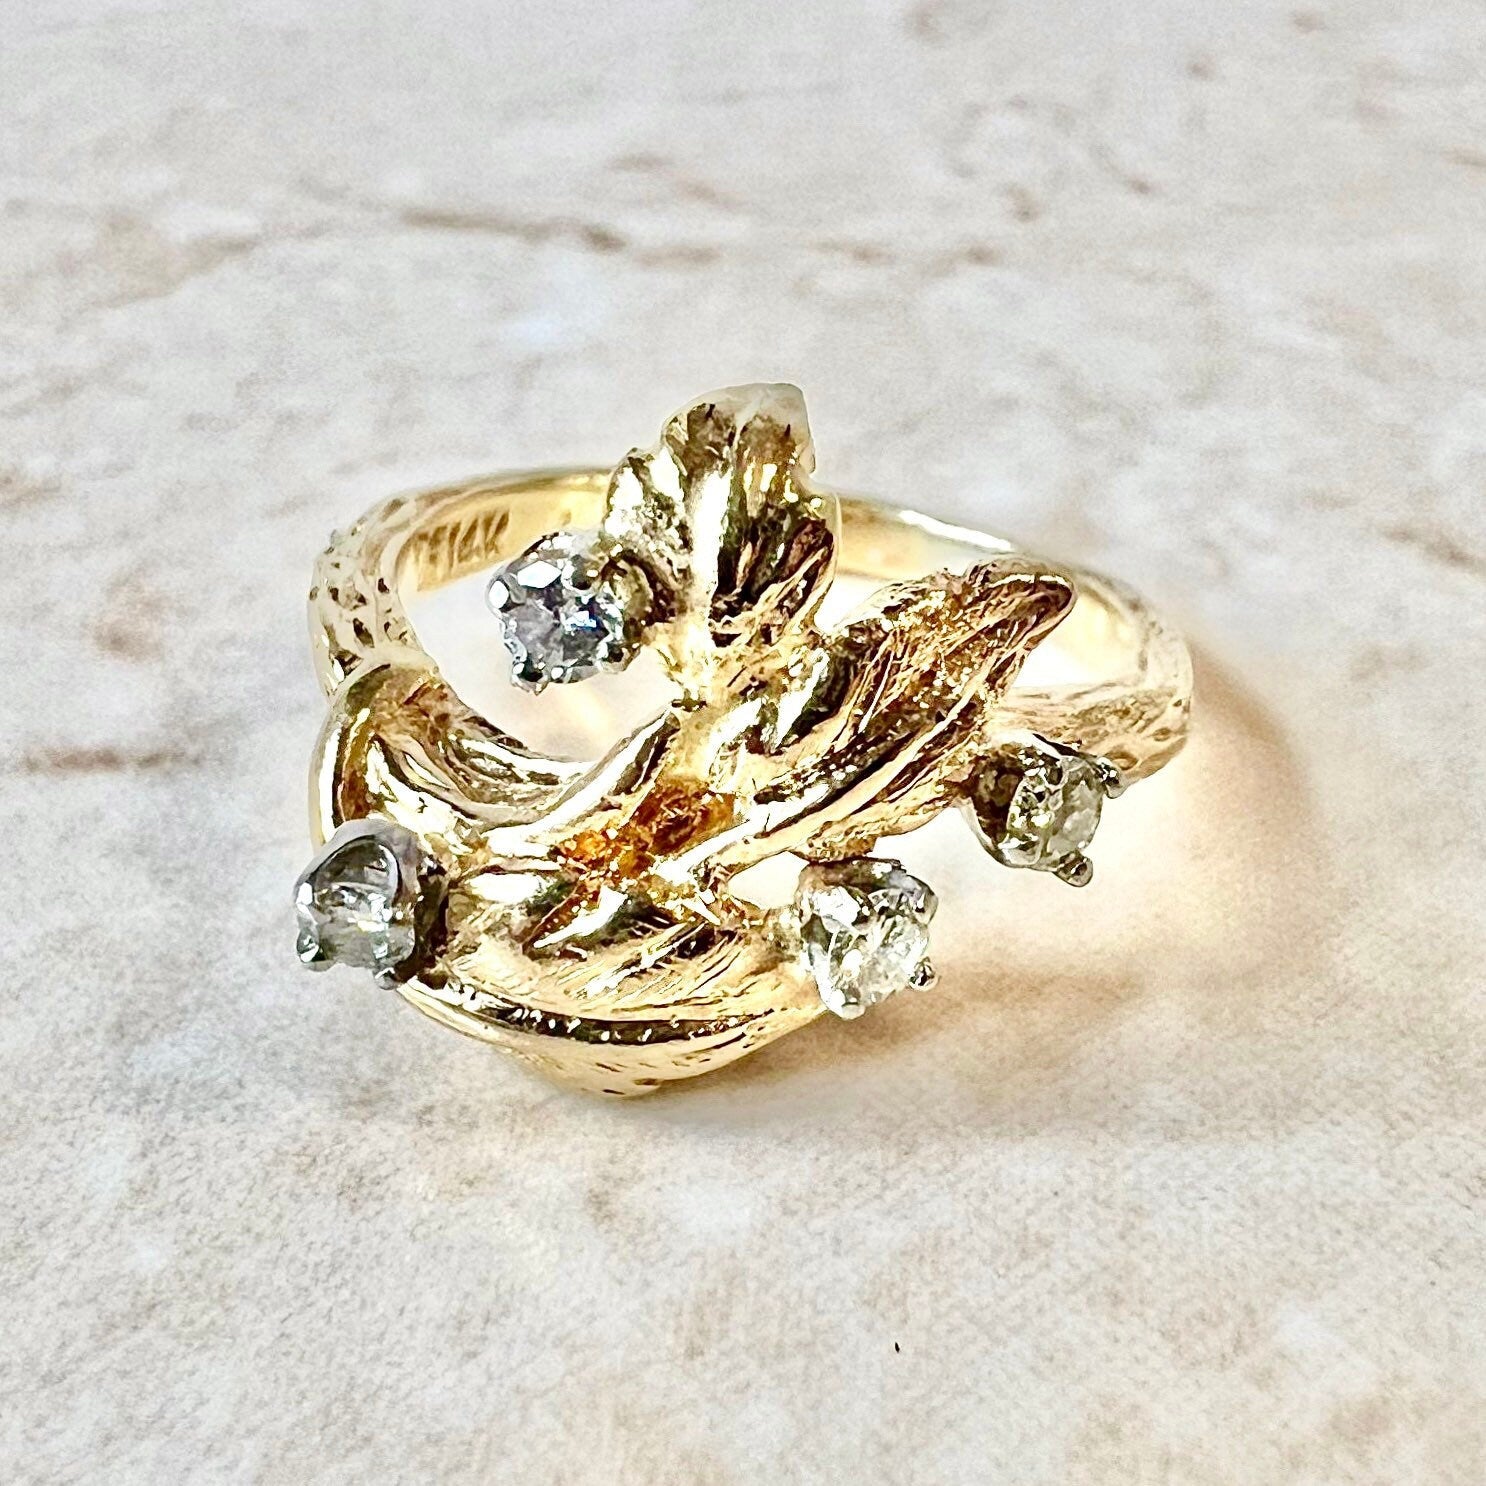 Vintage 14K Diamond Leaf Cocktail Ring - Yellow Gold Diamond Ring - Statement Ring - Gold Floral Ring - Christmas Gifts For Her-Holiday Gift